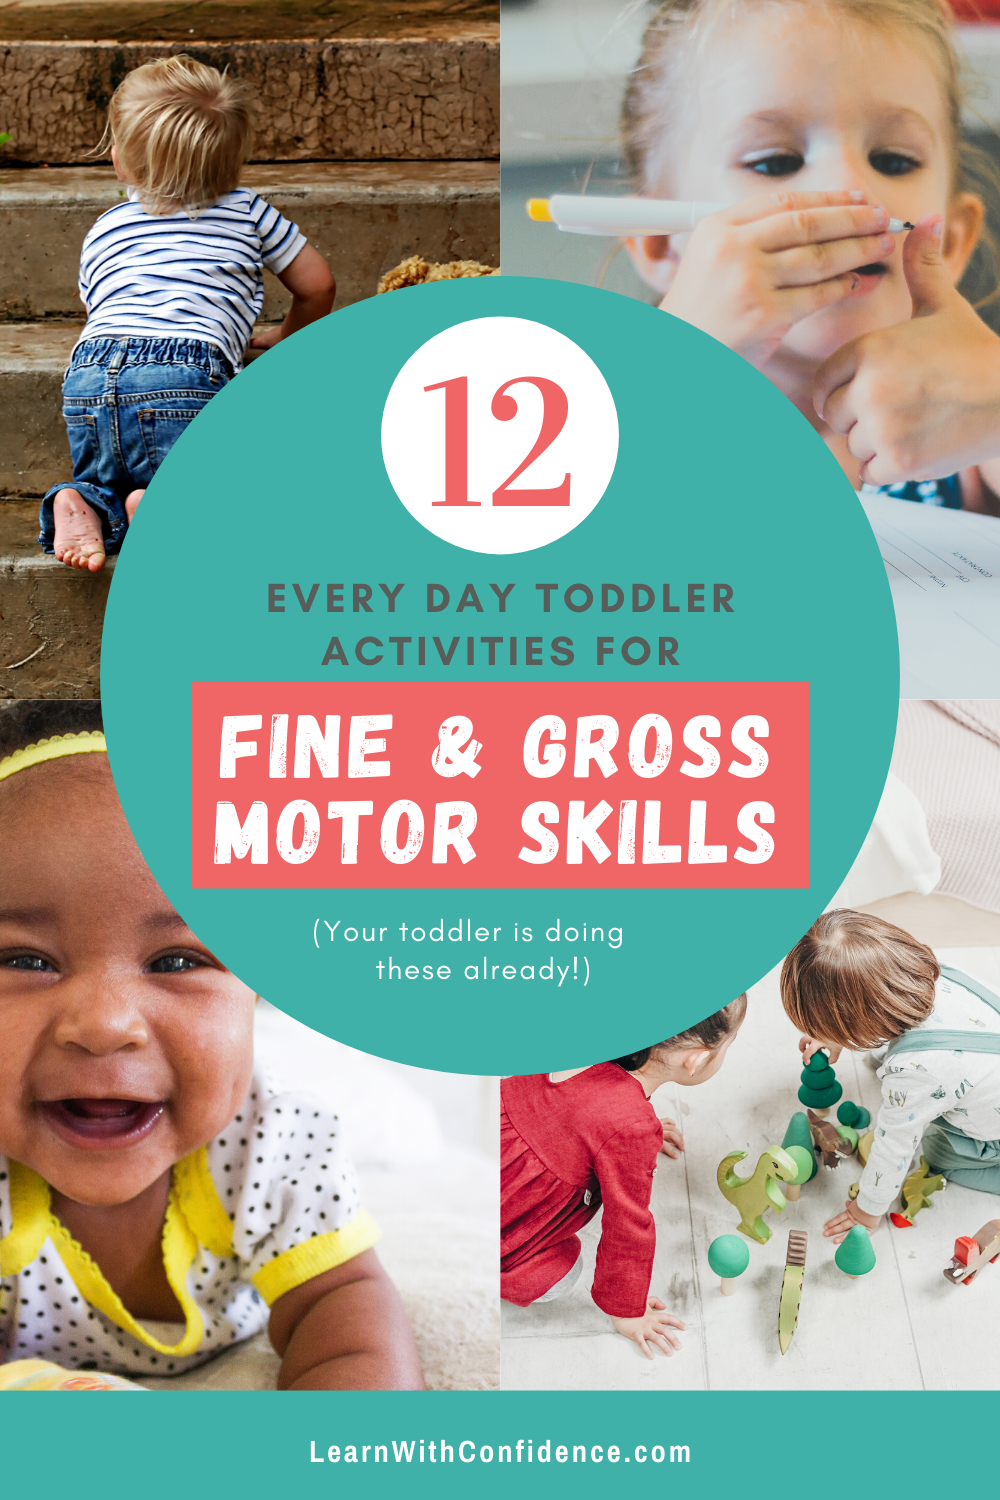 12 Everyday toddler activities that develop fine and gross motor skills